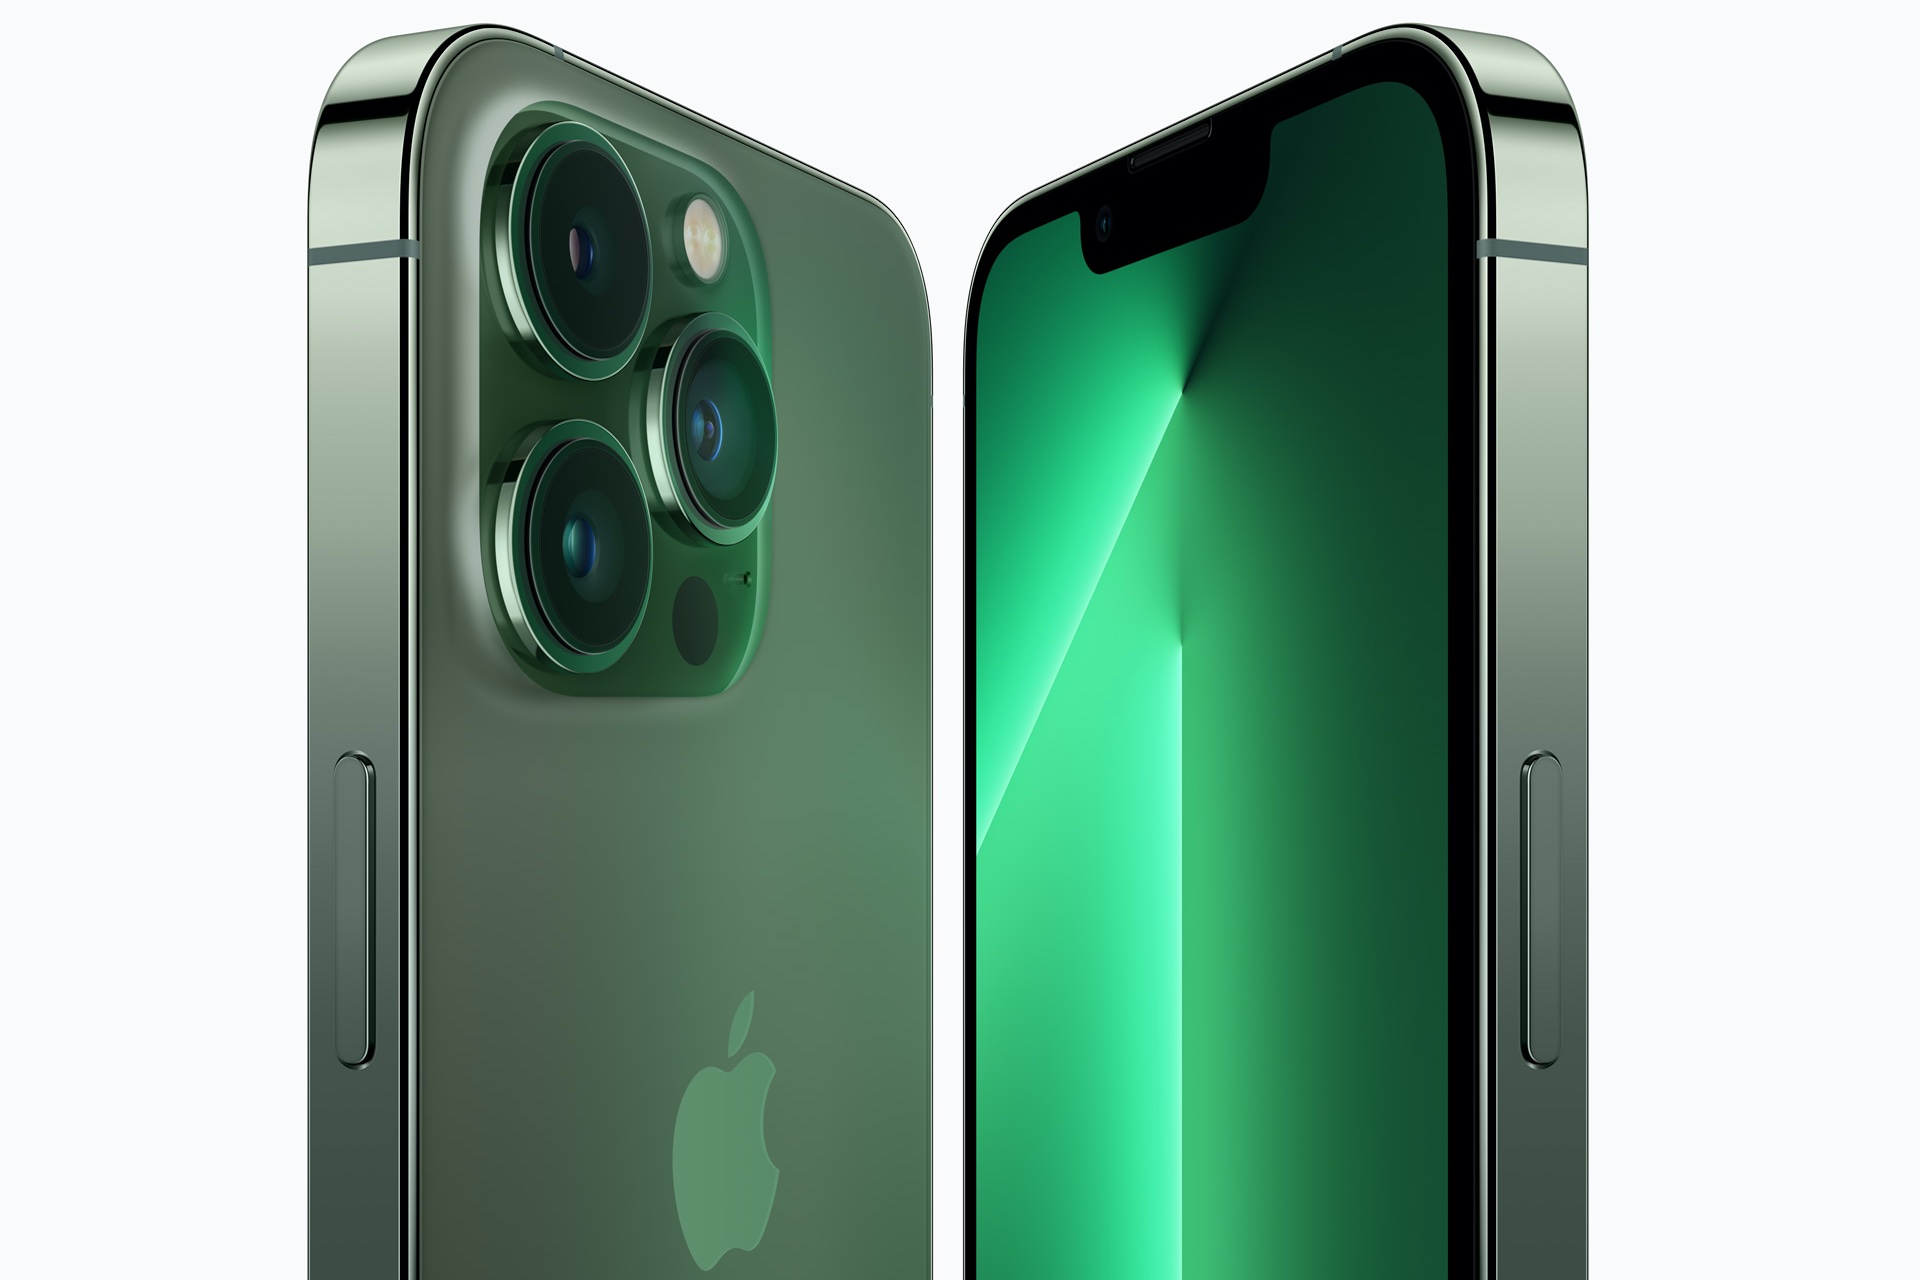 The iPhone 13 and iPhone 13 Pro now in stunning green finishes